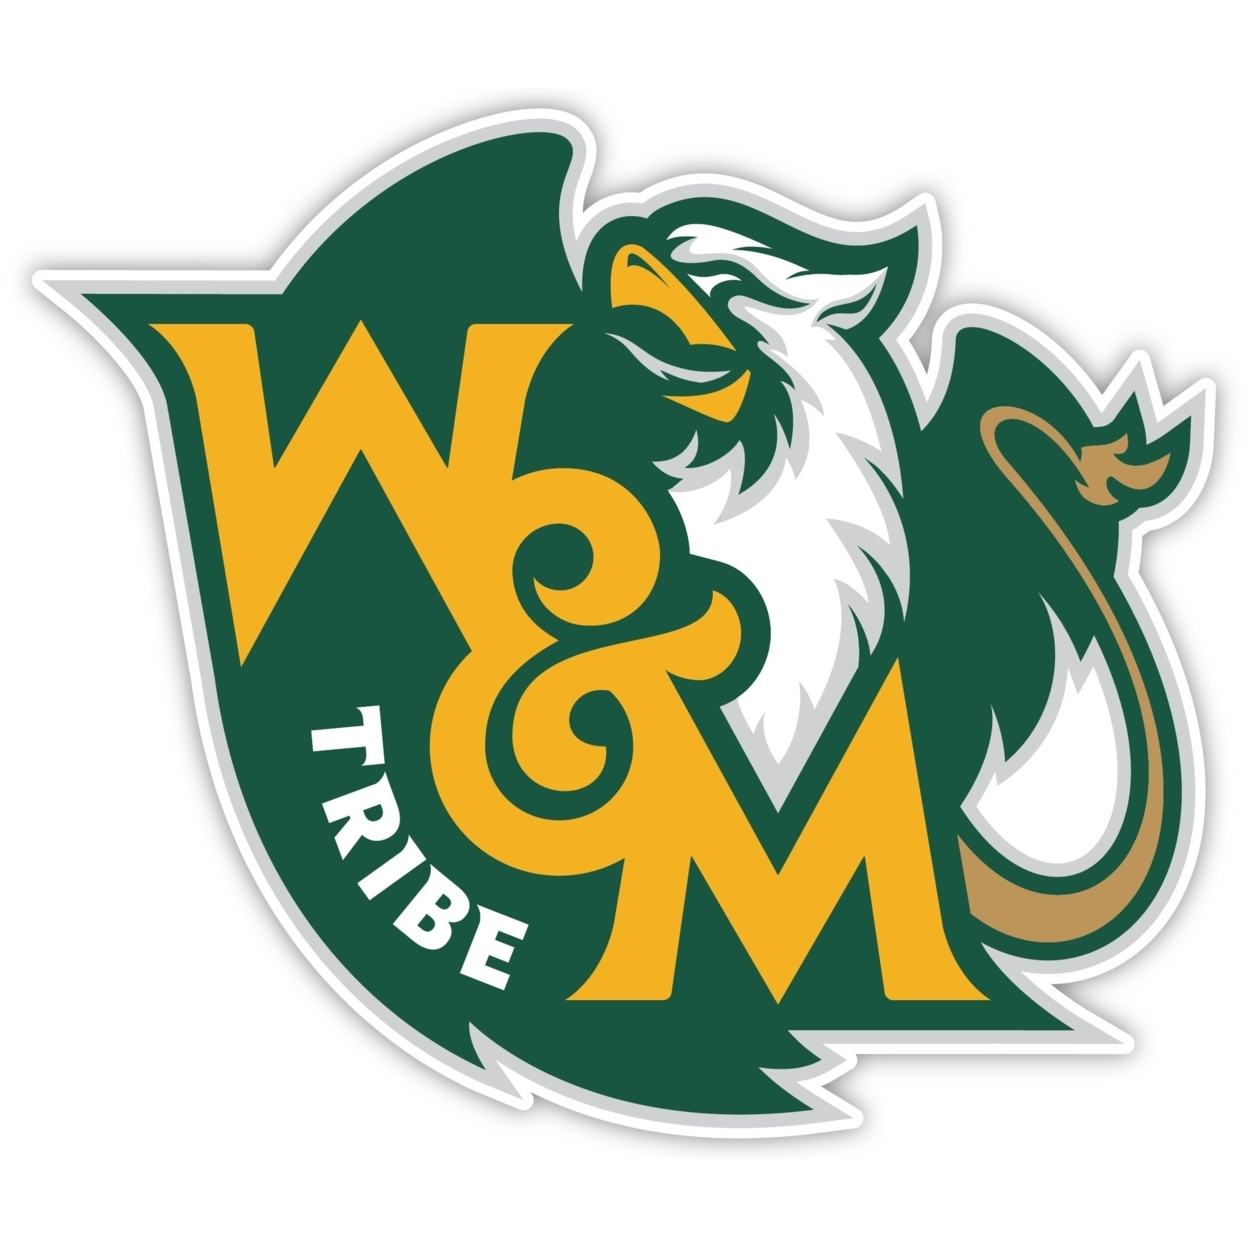 William And Mary 6 Inch Vinyl Mascot Decal Sticker - 1, 4-Inch